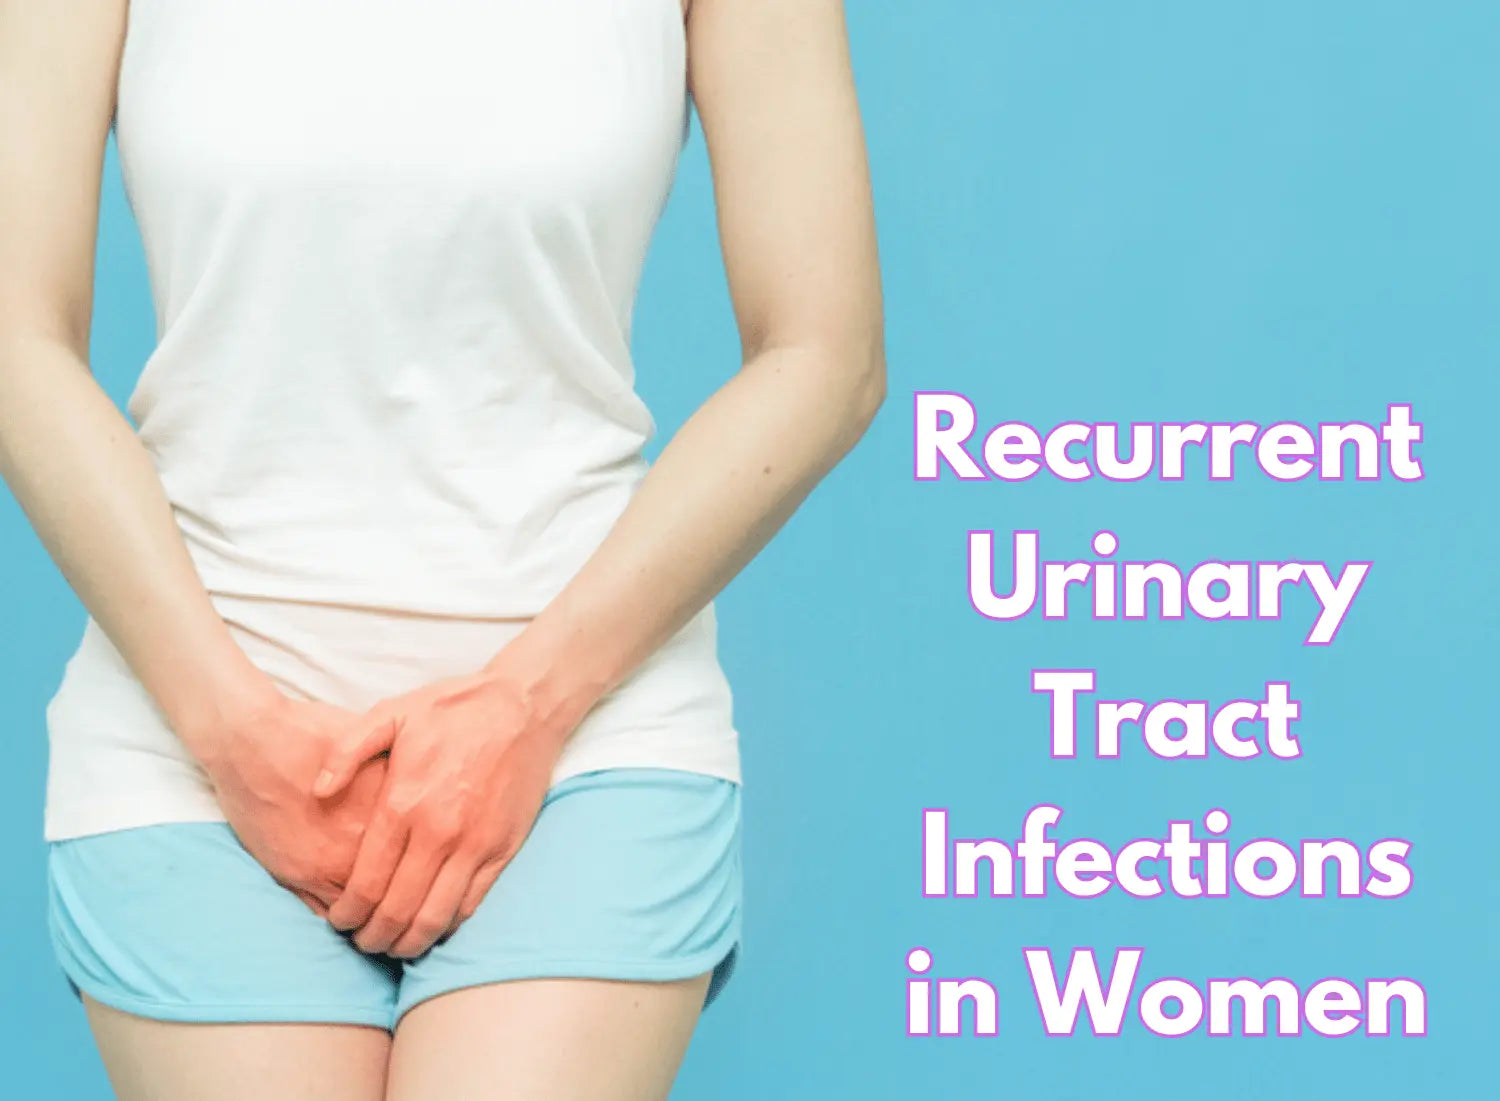 Recurrent Urinary Tract Infections in Women: Causes and Treatment Options - Underleak